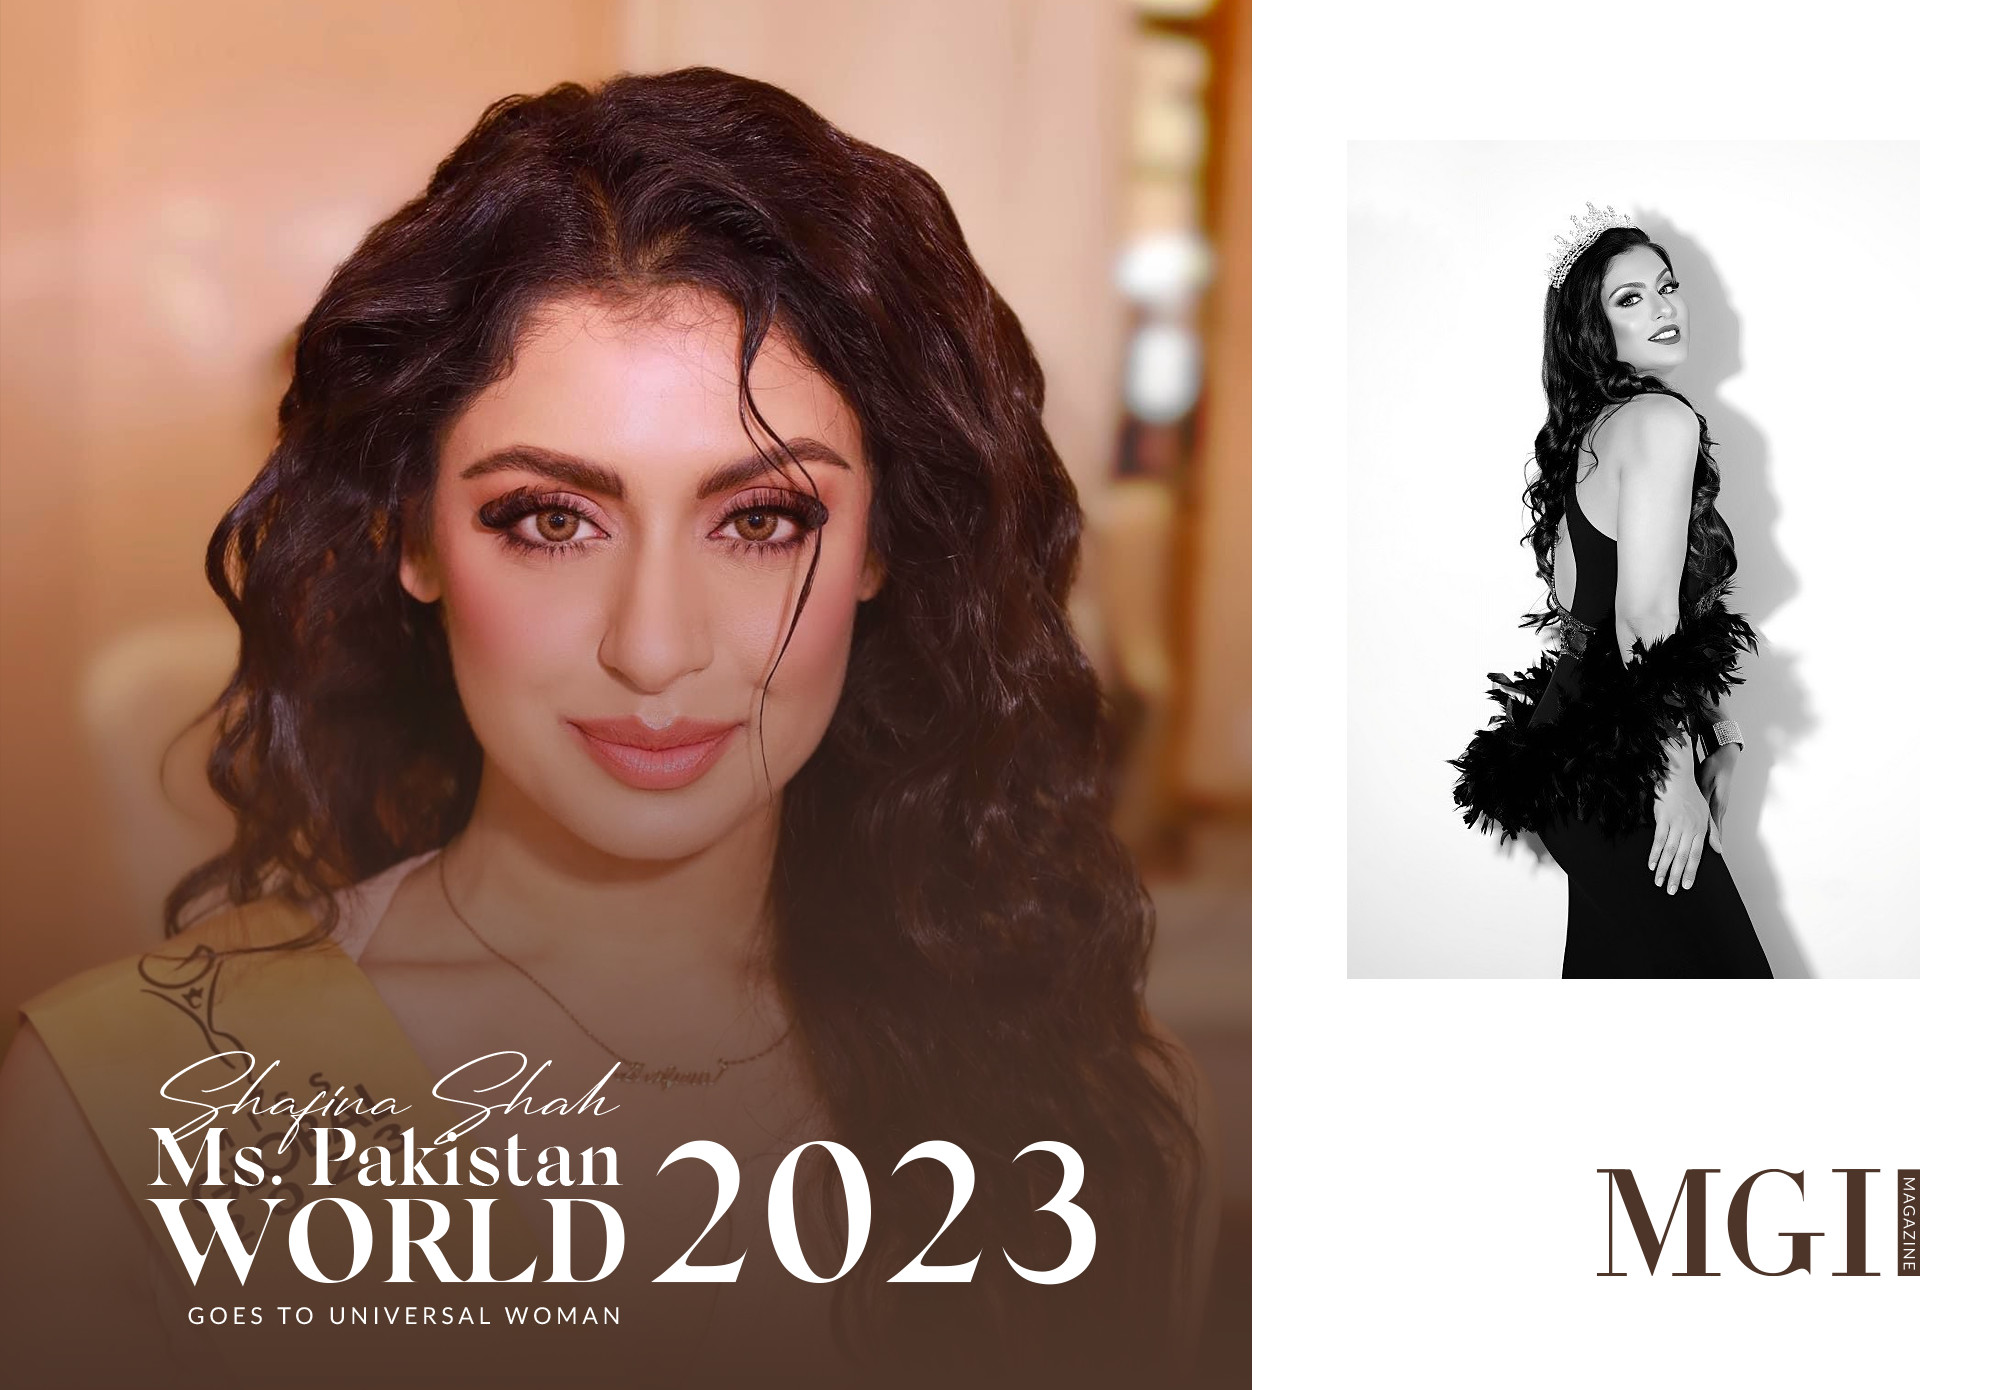 Shafina Shah - From the stage of Ms. Pakistan World 2023 to the Universal Woman arena